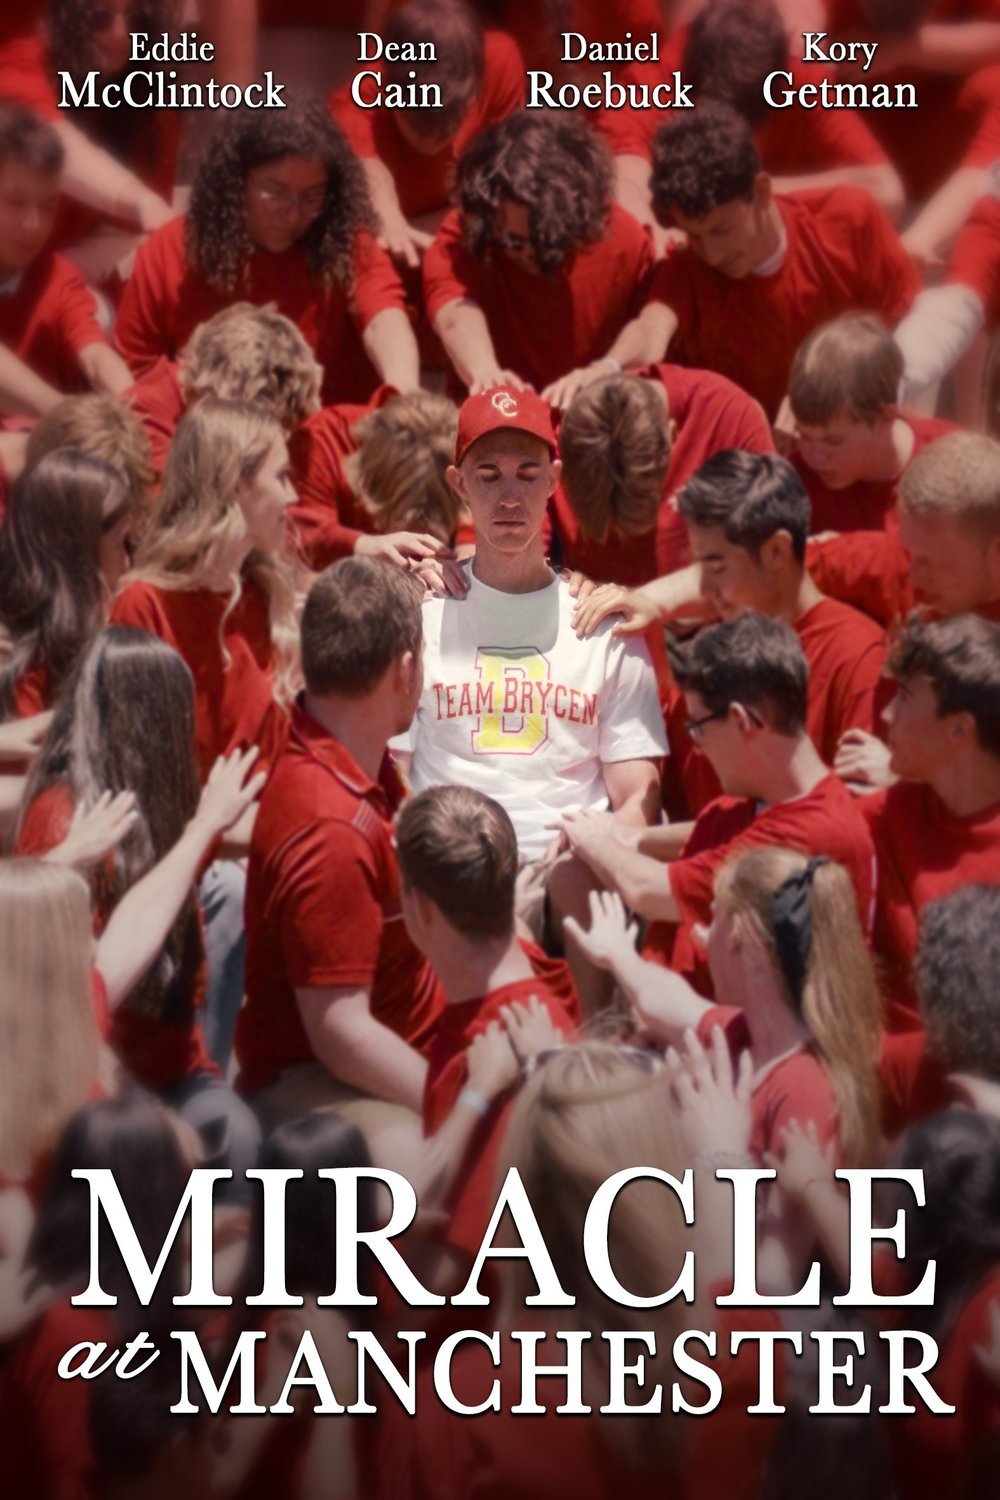 Poster of the movie Miracle at Manchester